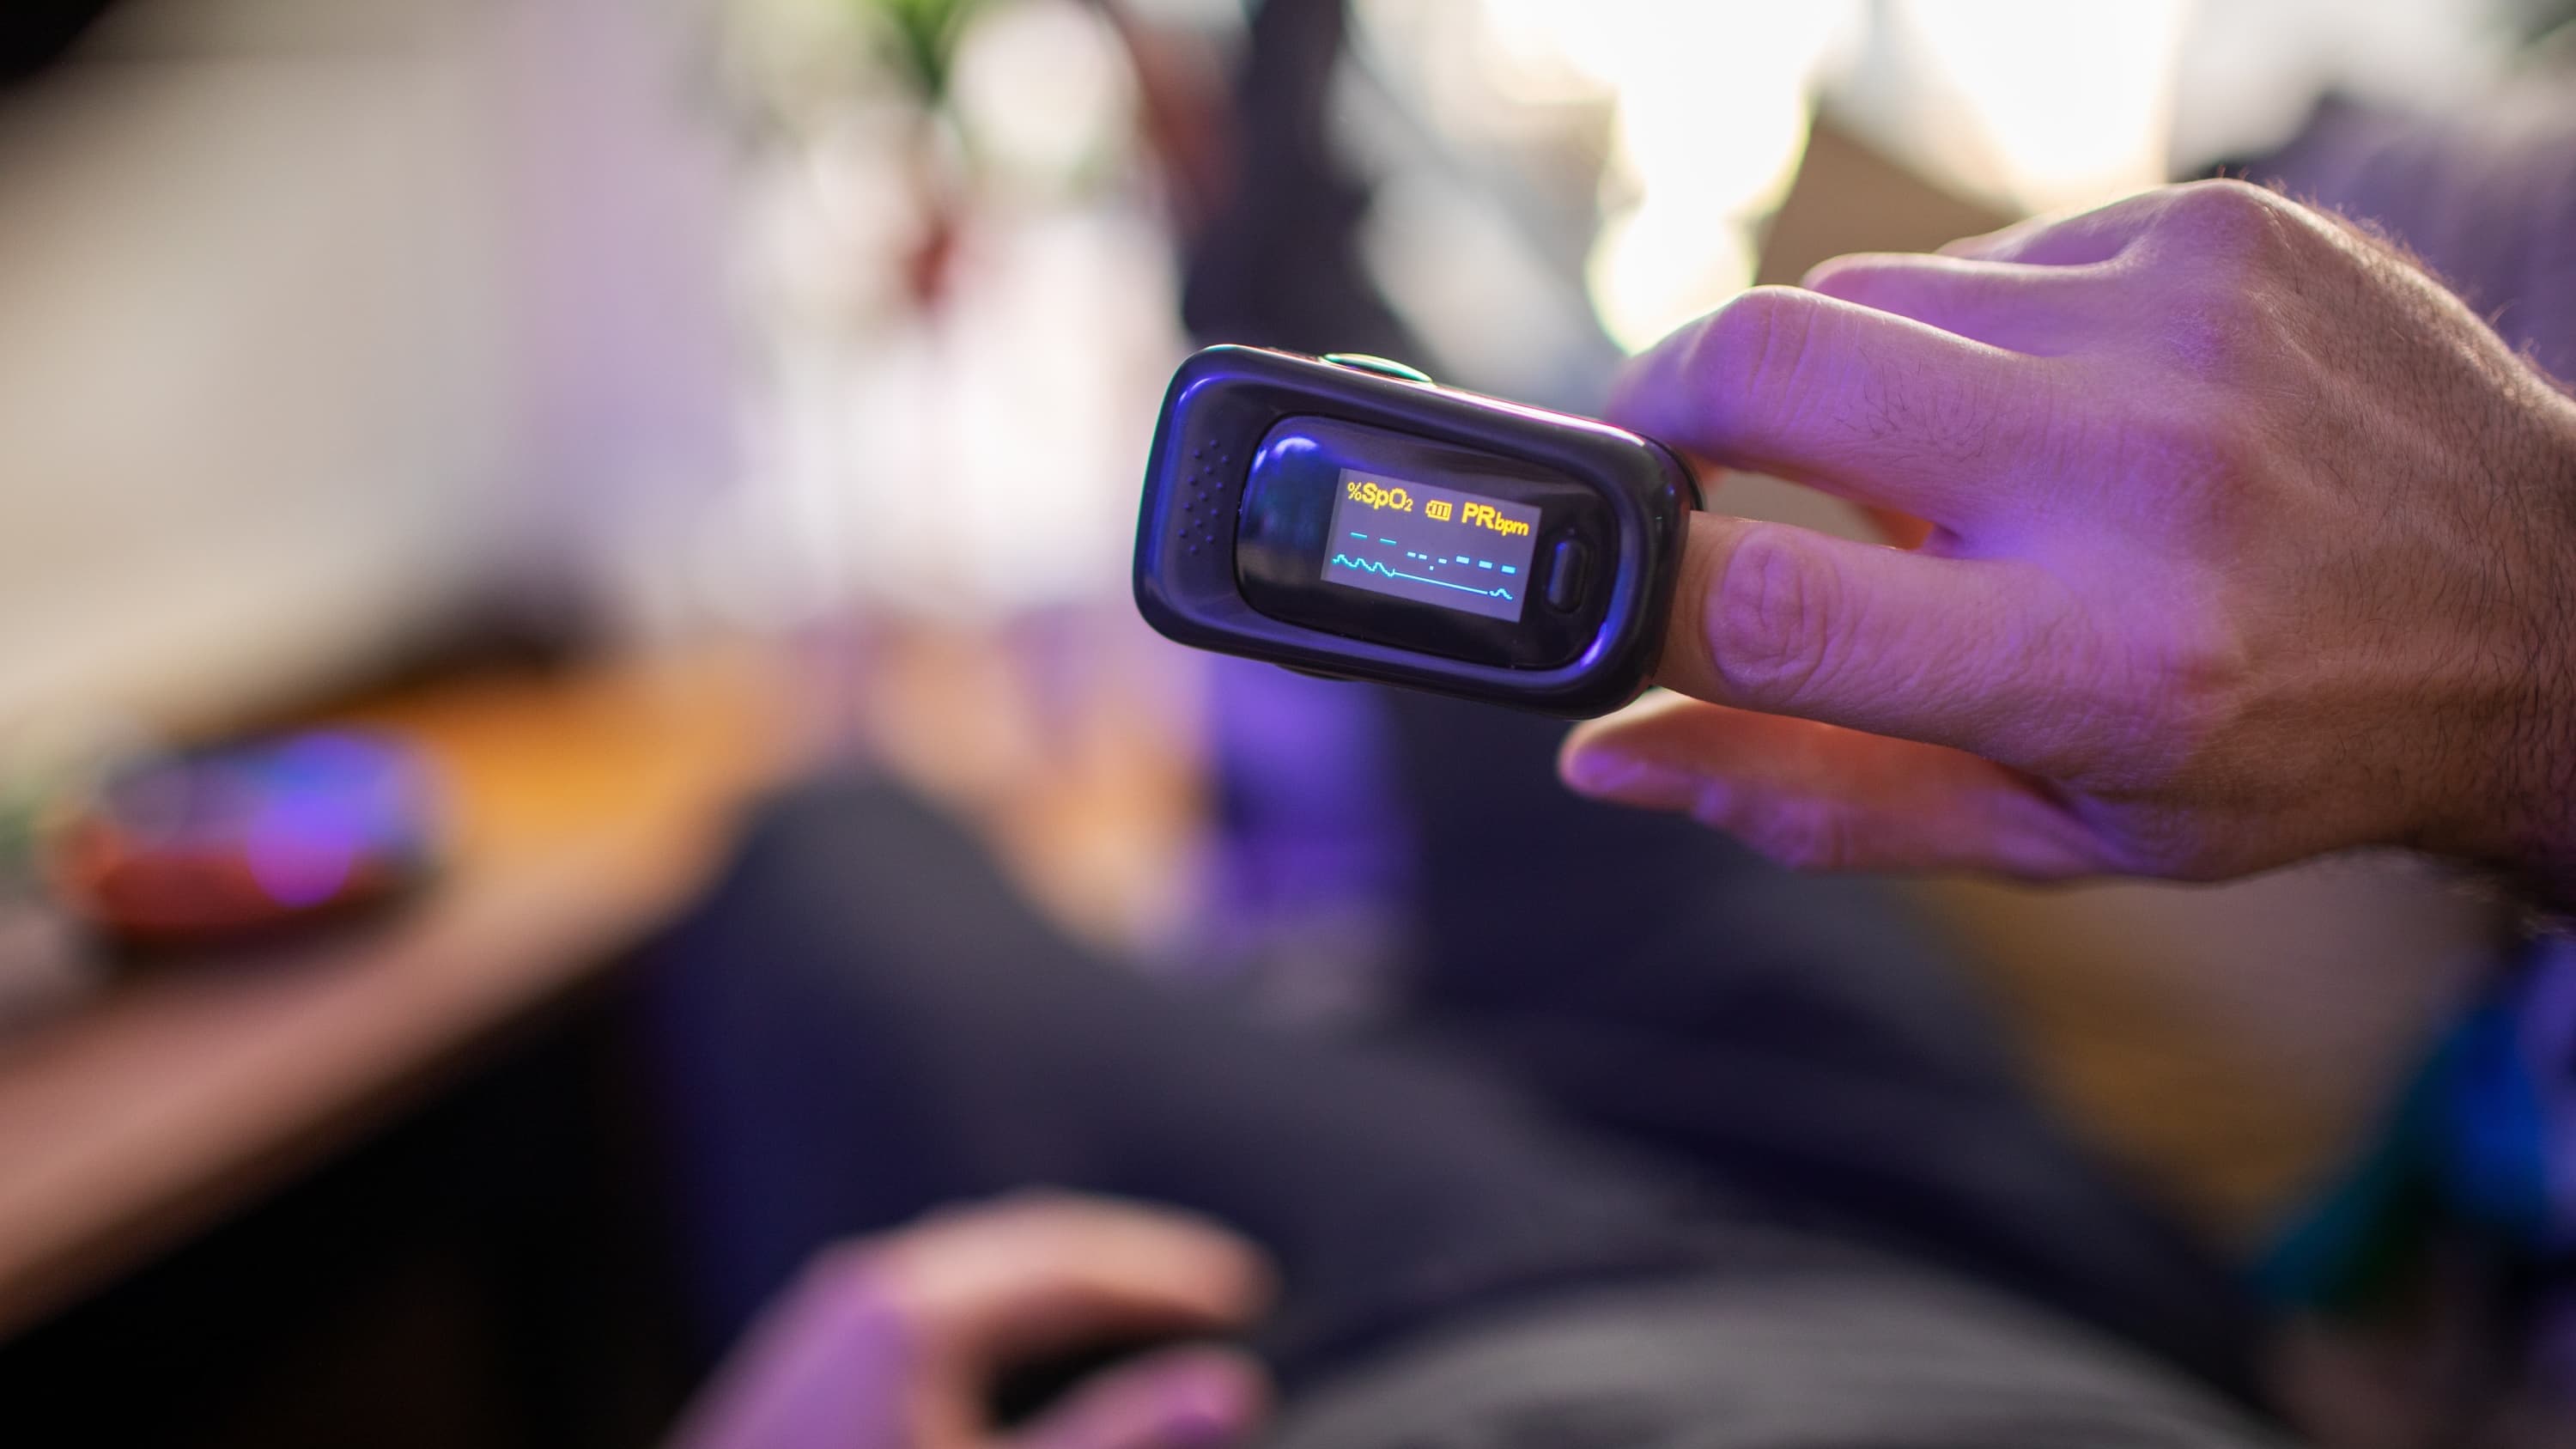 person with at-home pulse oximeter, possibly used to monitoring a COVID-19 symptom